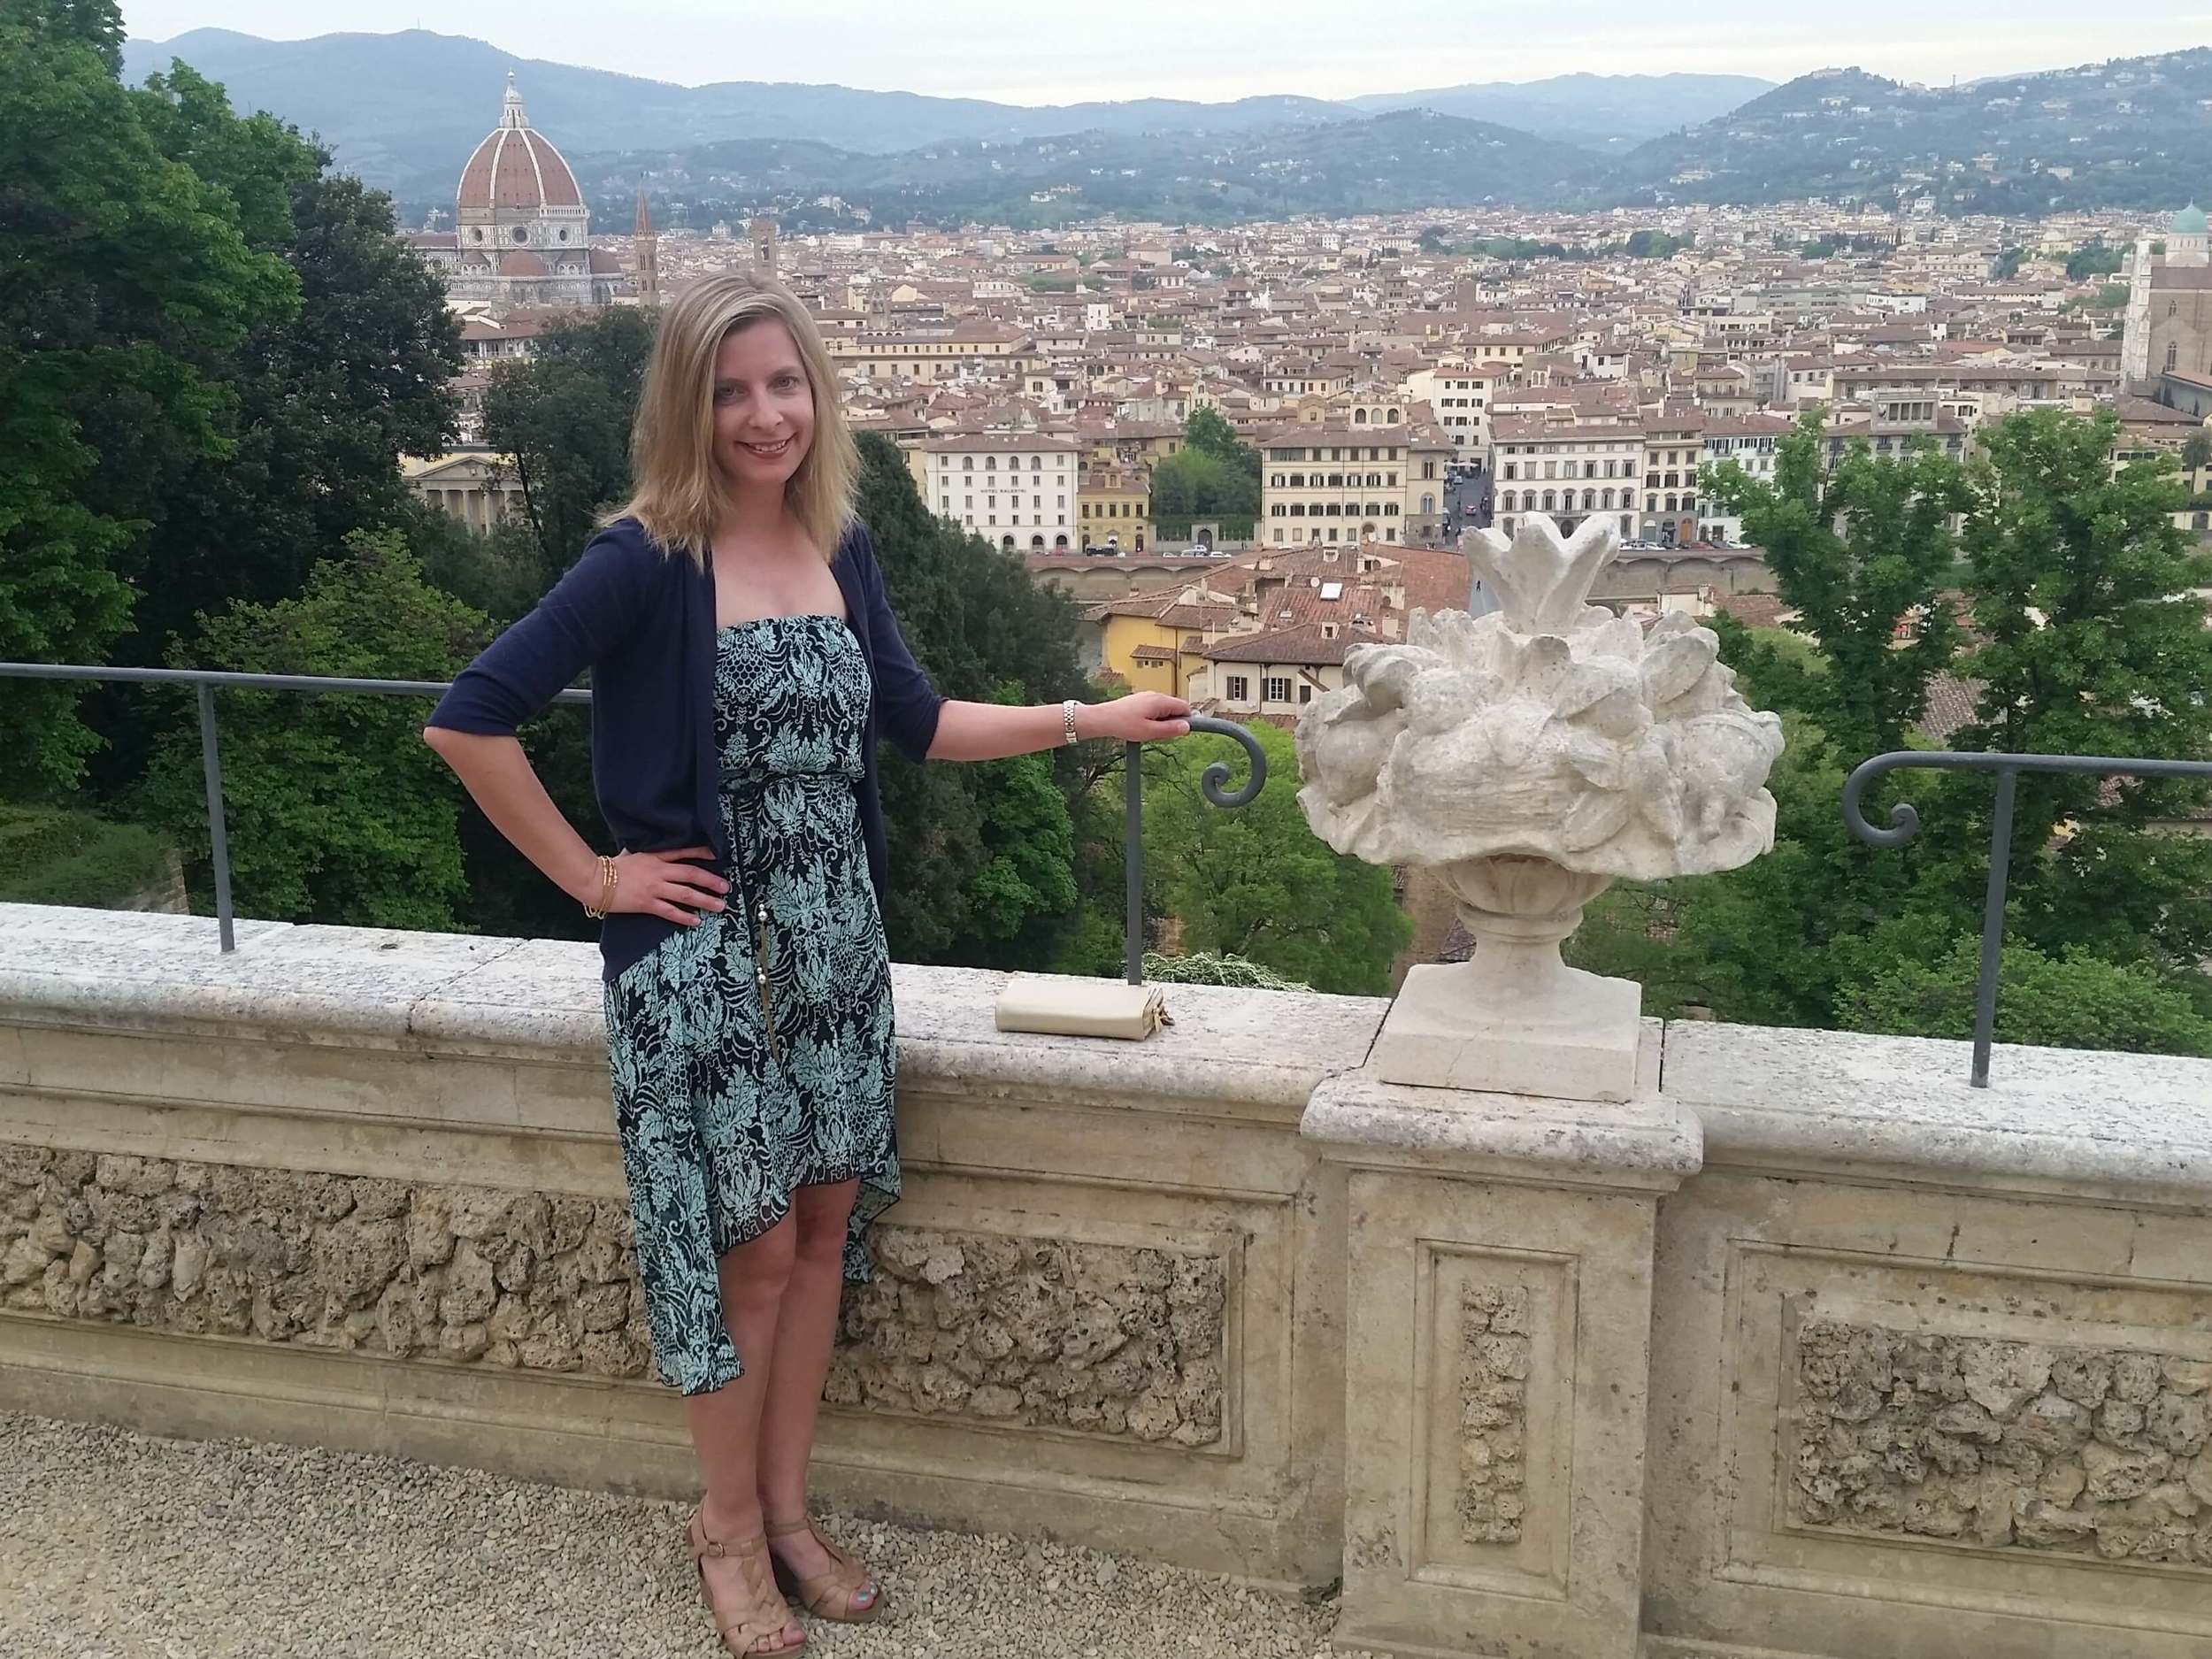 Overlooking Florence on the last night of a trip to Tuscany.